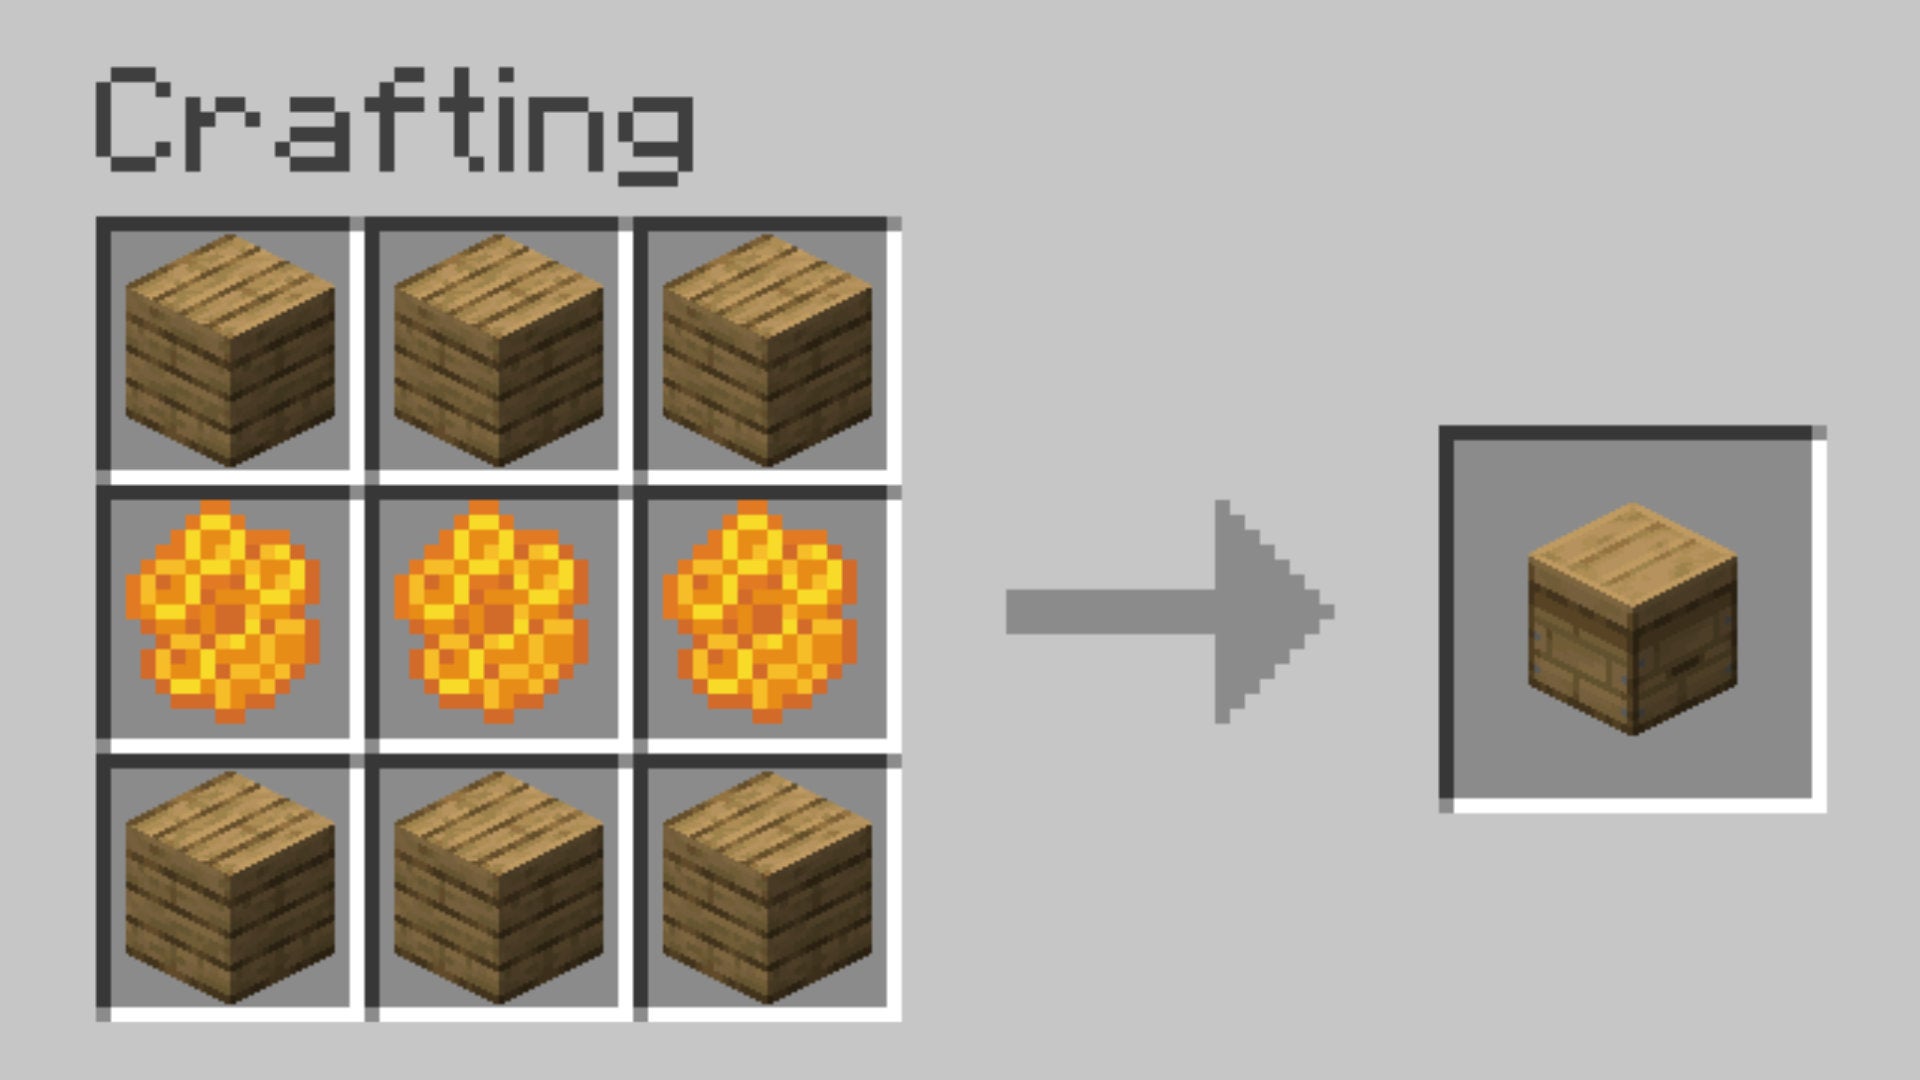 The recipe for creating a Beehive in Minecraft.